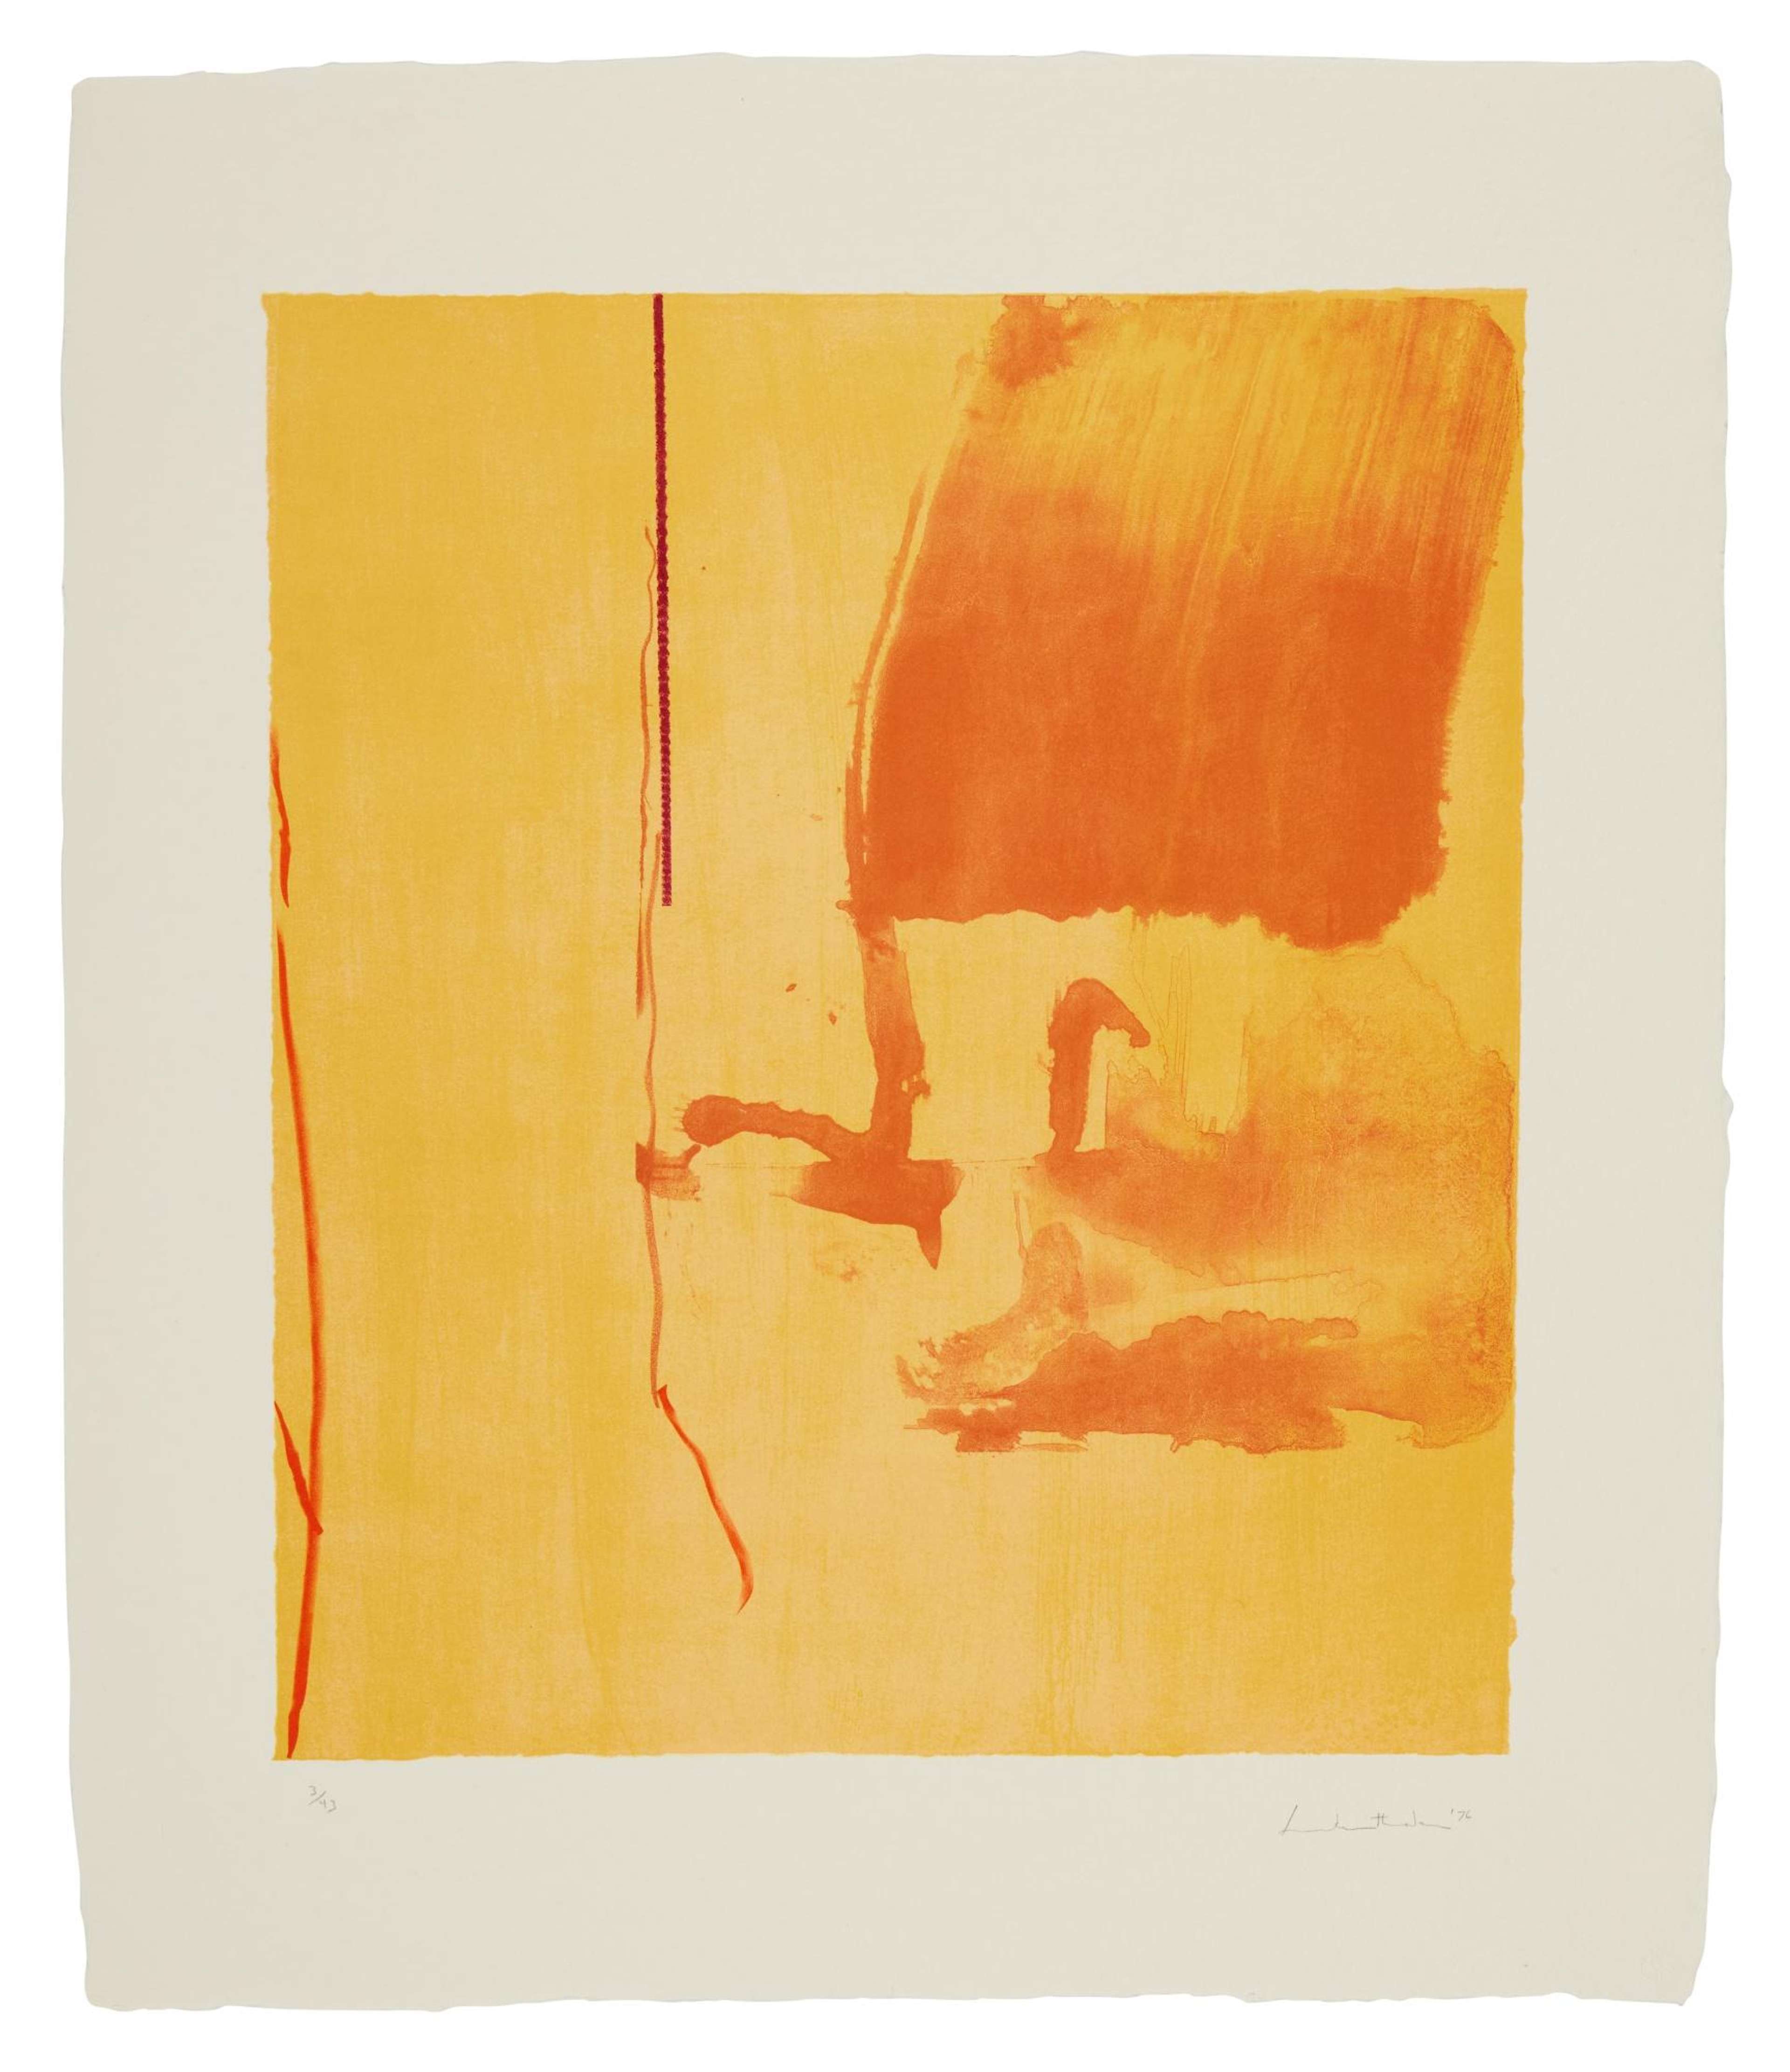 Helen Frankenthaler’s Harvest. An abstract expressionist woodcut print of warm orange and yellow tones.